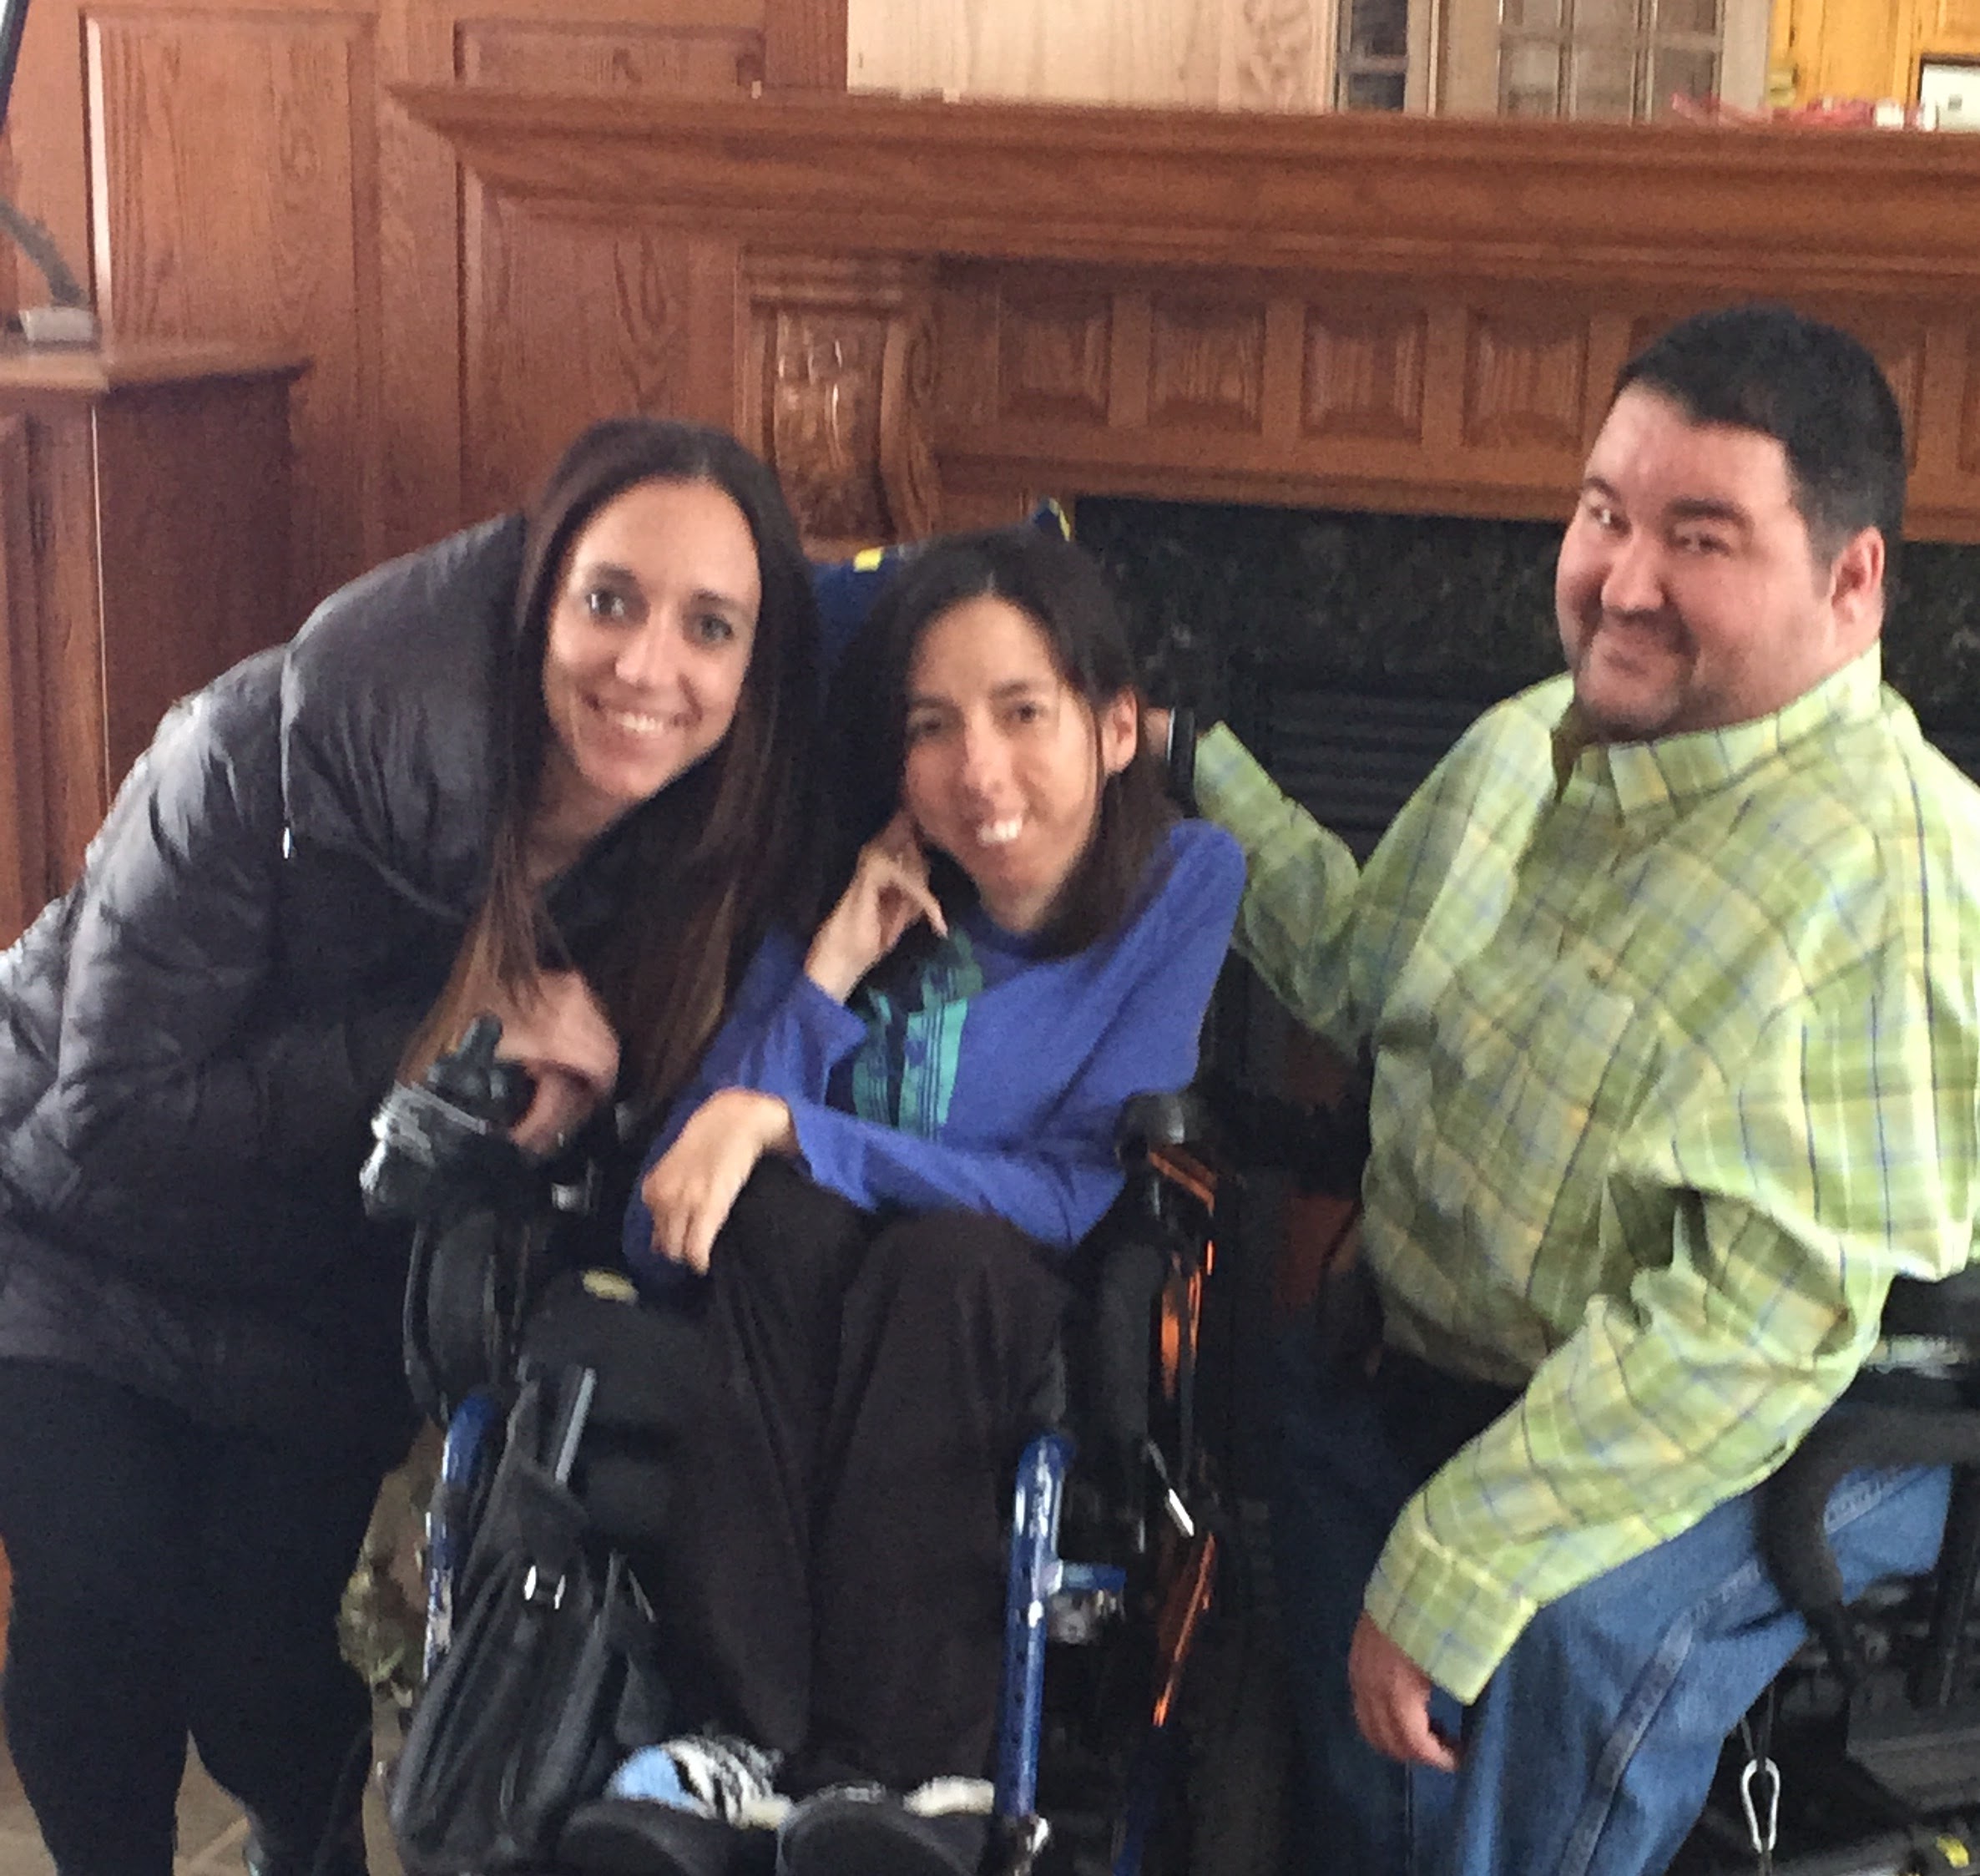 Meegan Winters founded Able Eyes, a disability focused website.